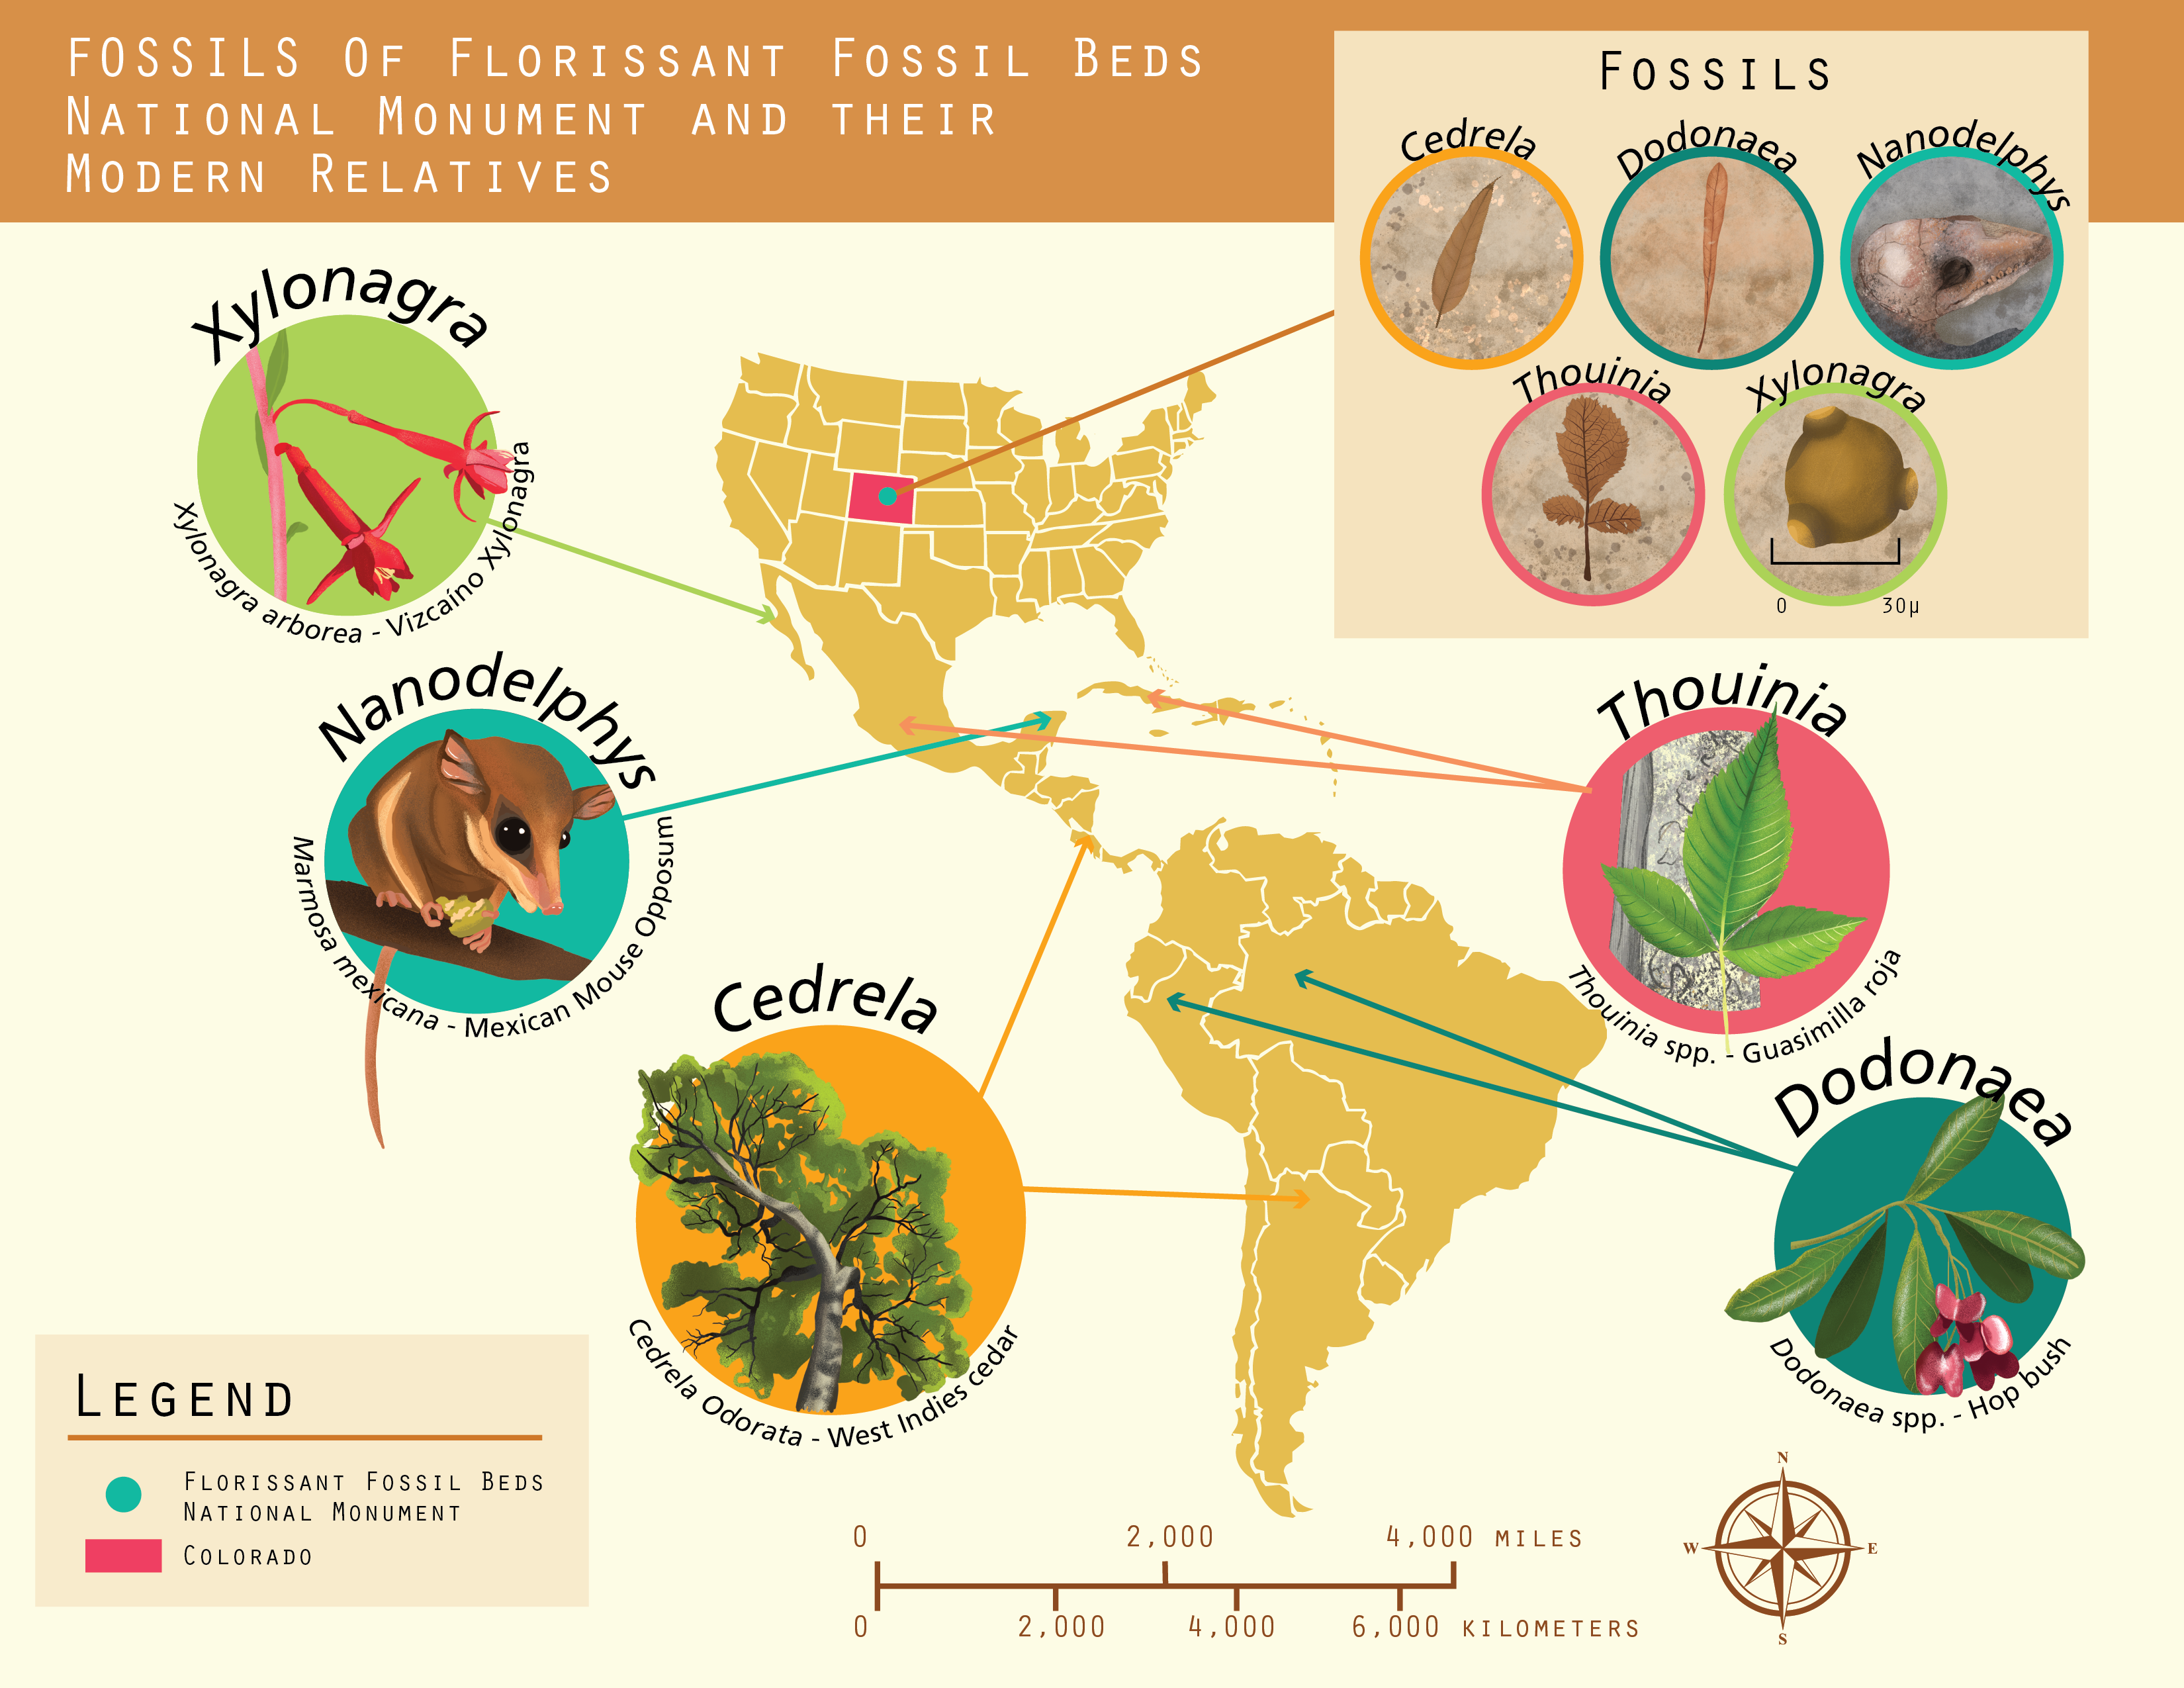 Map showing pictures of fossils found Florissant and a map of the US and then pictures of the modern plants and animal relatives with arrows pointing to their current location in Mexico, Central America, the Caribbean Islands, and South America.